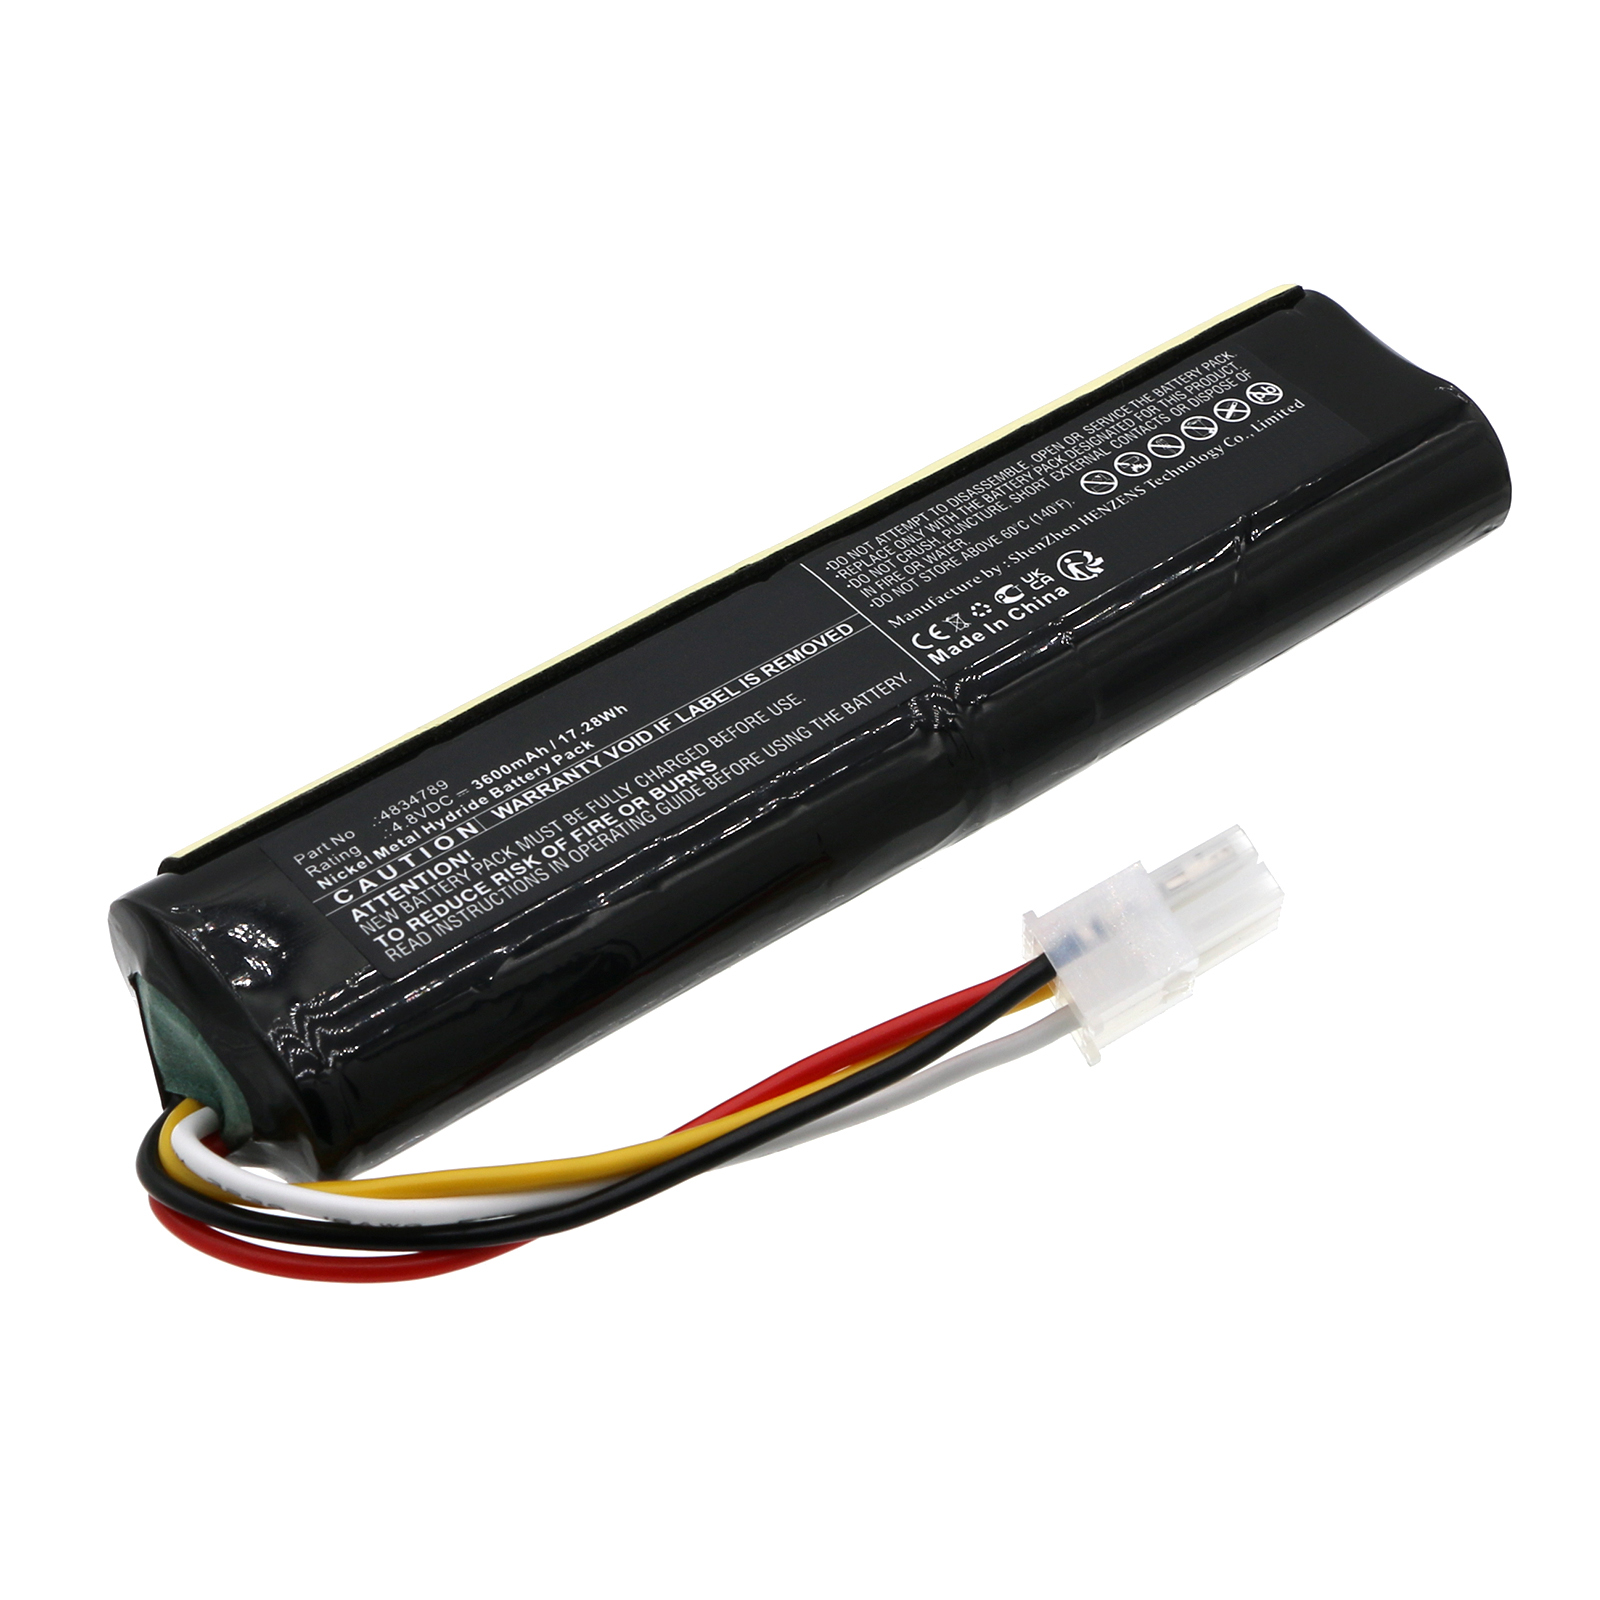 Synergy Digital Medical Battery, Compatible with Siemens 110382 Medical Battery (Ni-MH, 4.8V, 3600mAh)